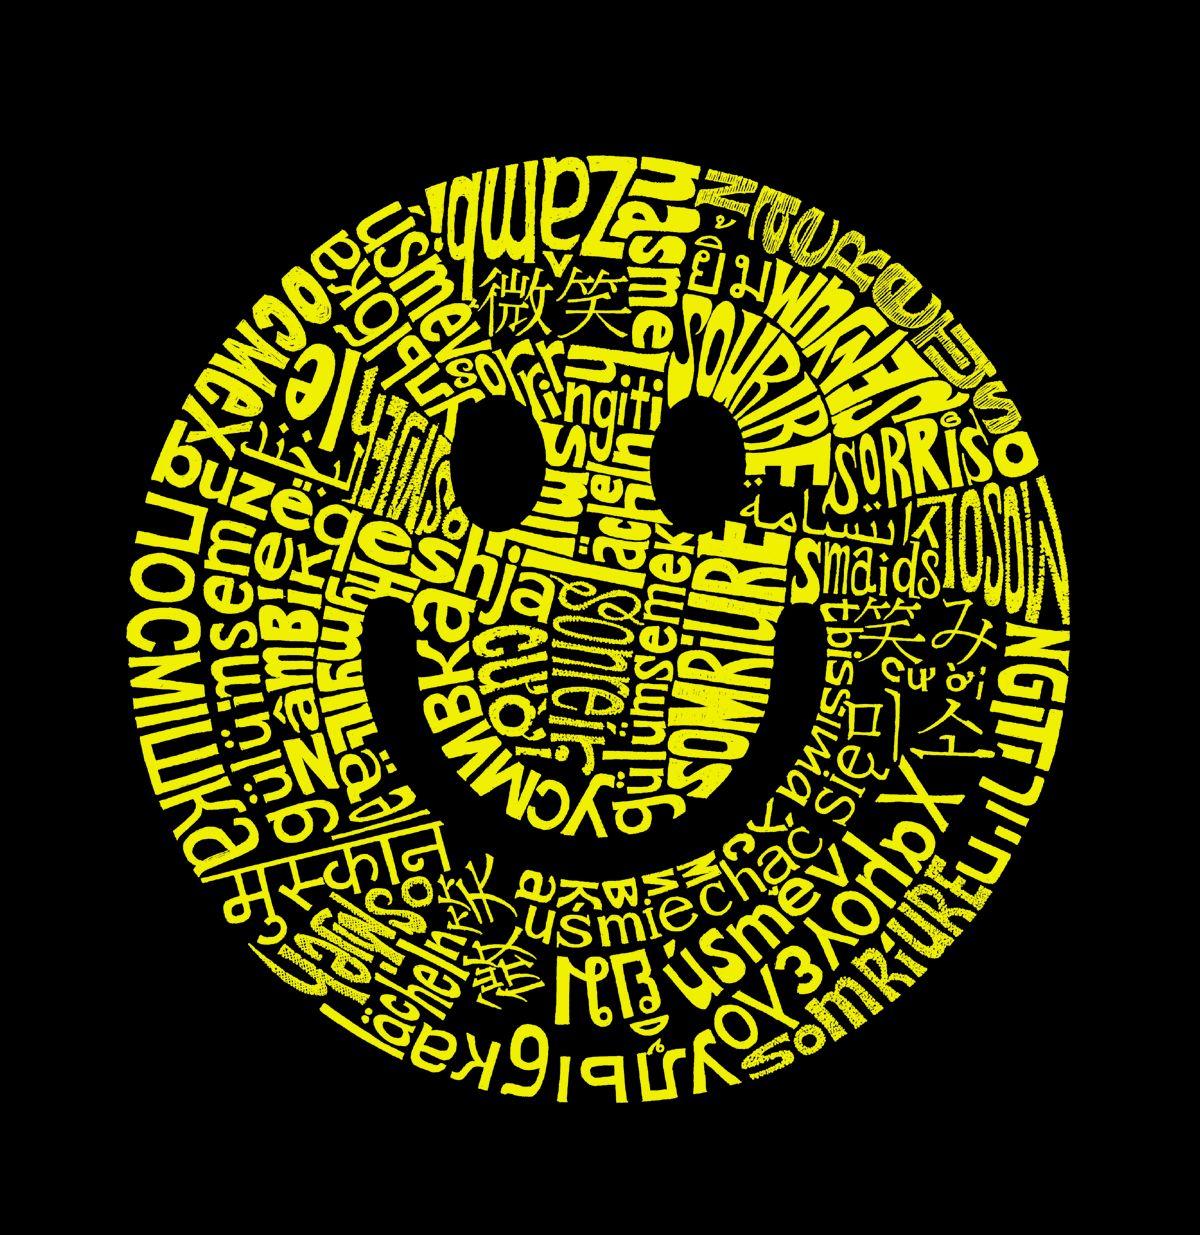 The Word Smile In Different Languages HD Wallpaper, Background Image